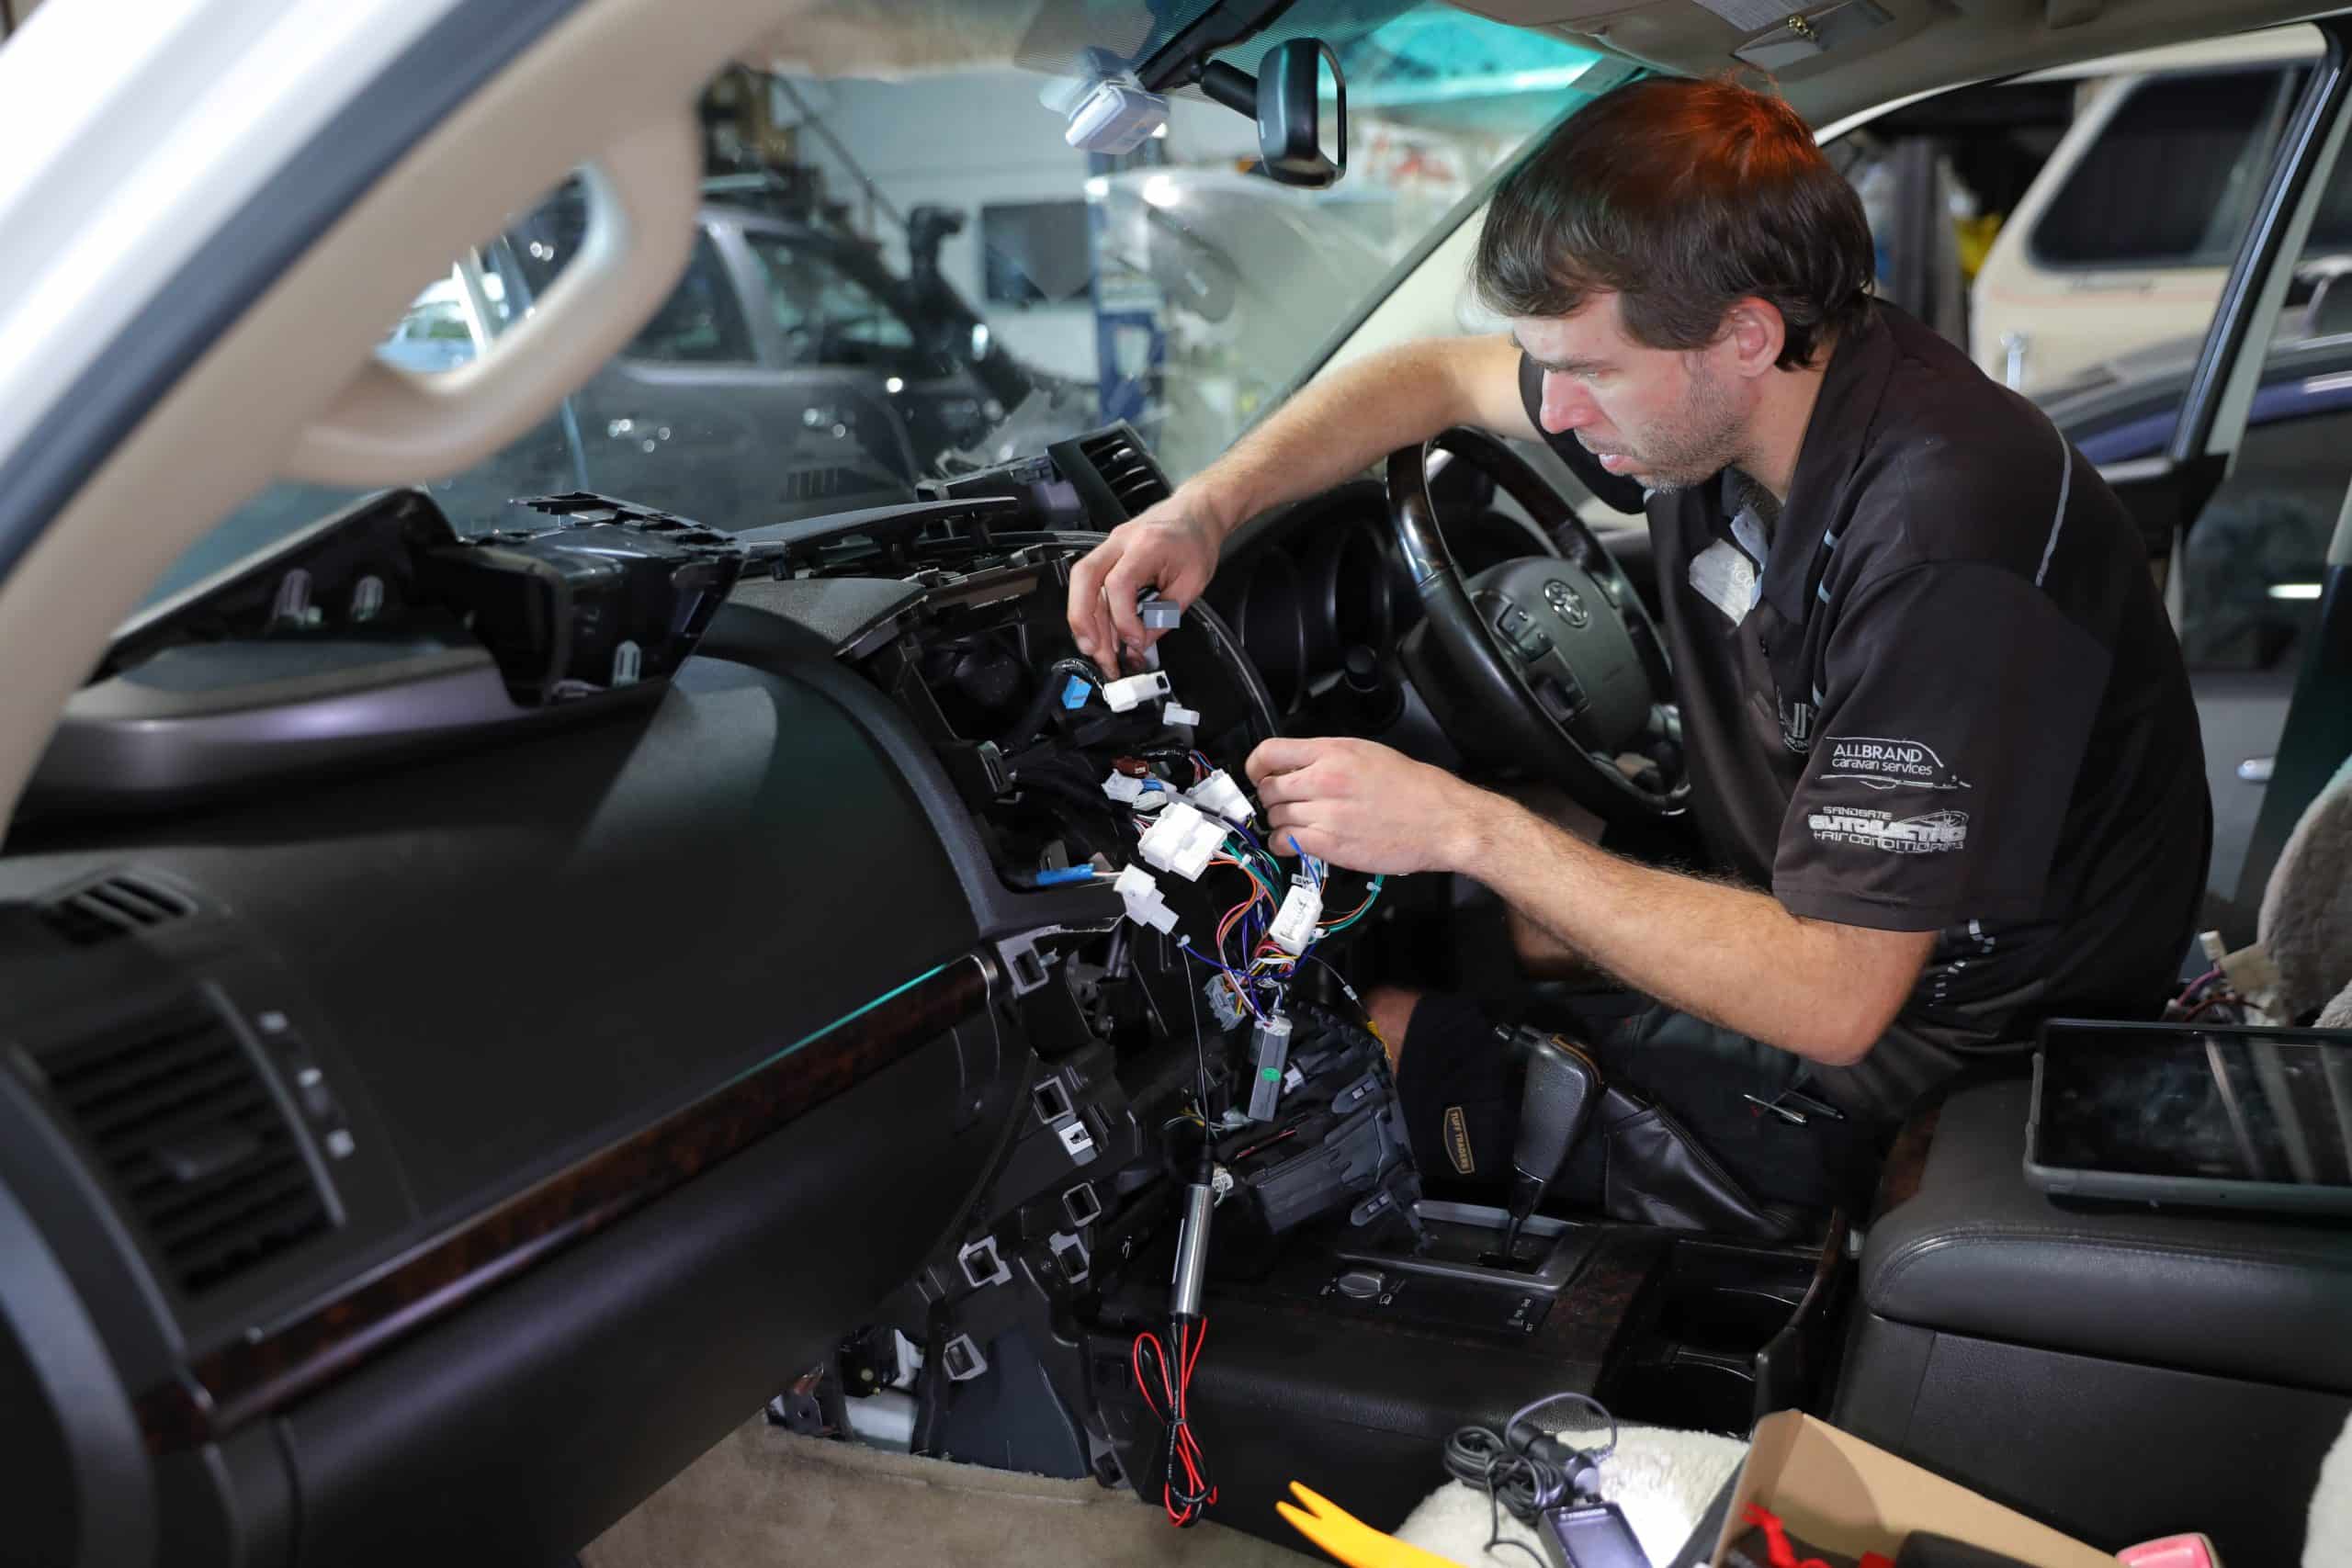 Technician troubleshooting car electrical issues inside a workshop